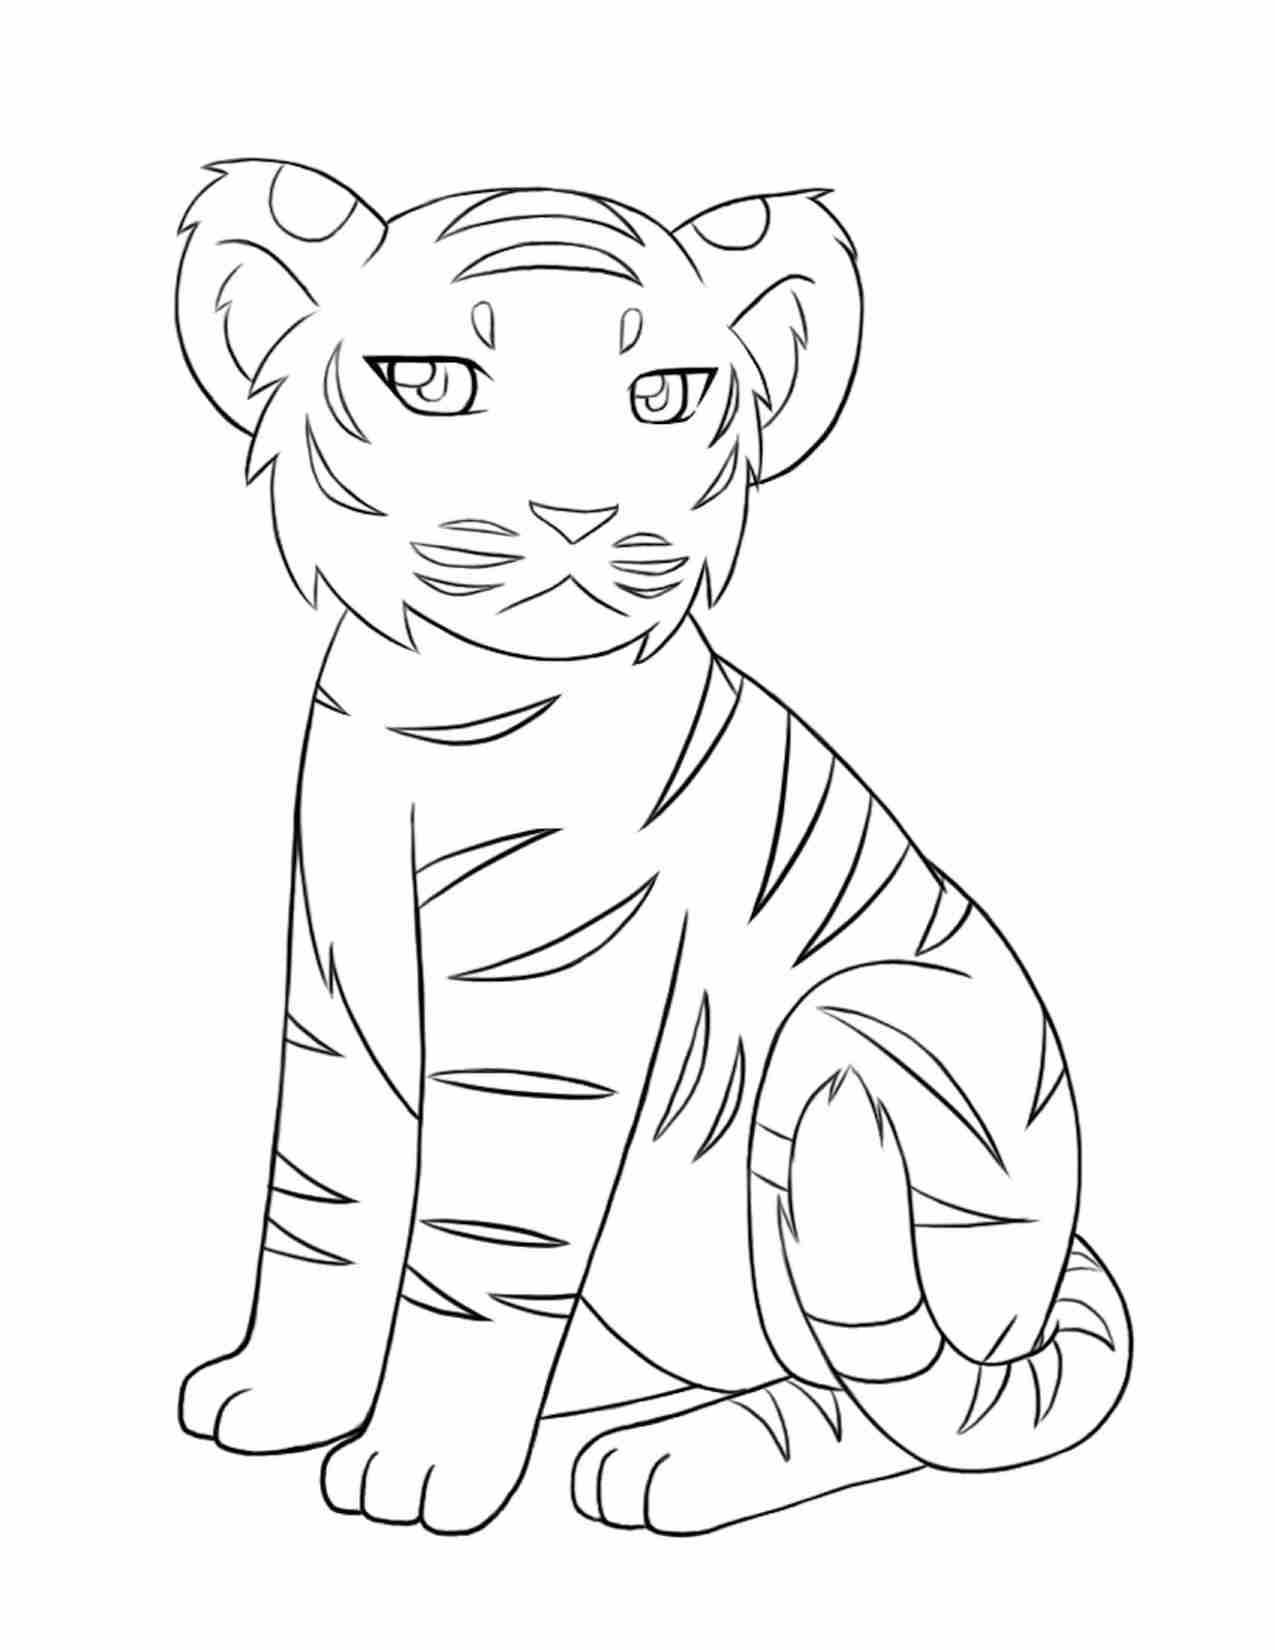 Coloring Pages Of Cute Tigers Ba Tiger Coloring Pages Drawn White Cute Brilliant Of Tigers 15 In